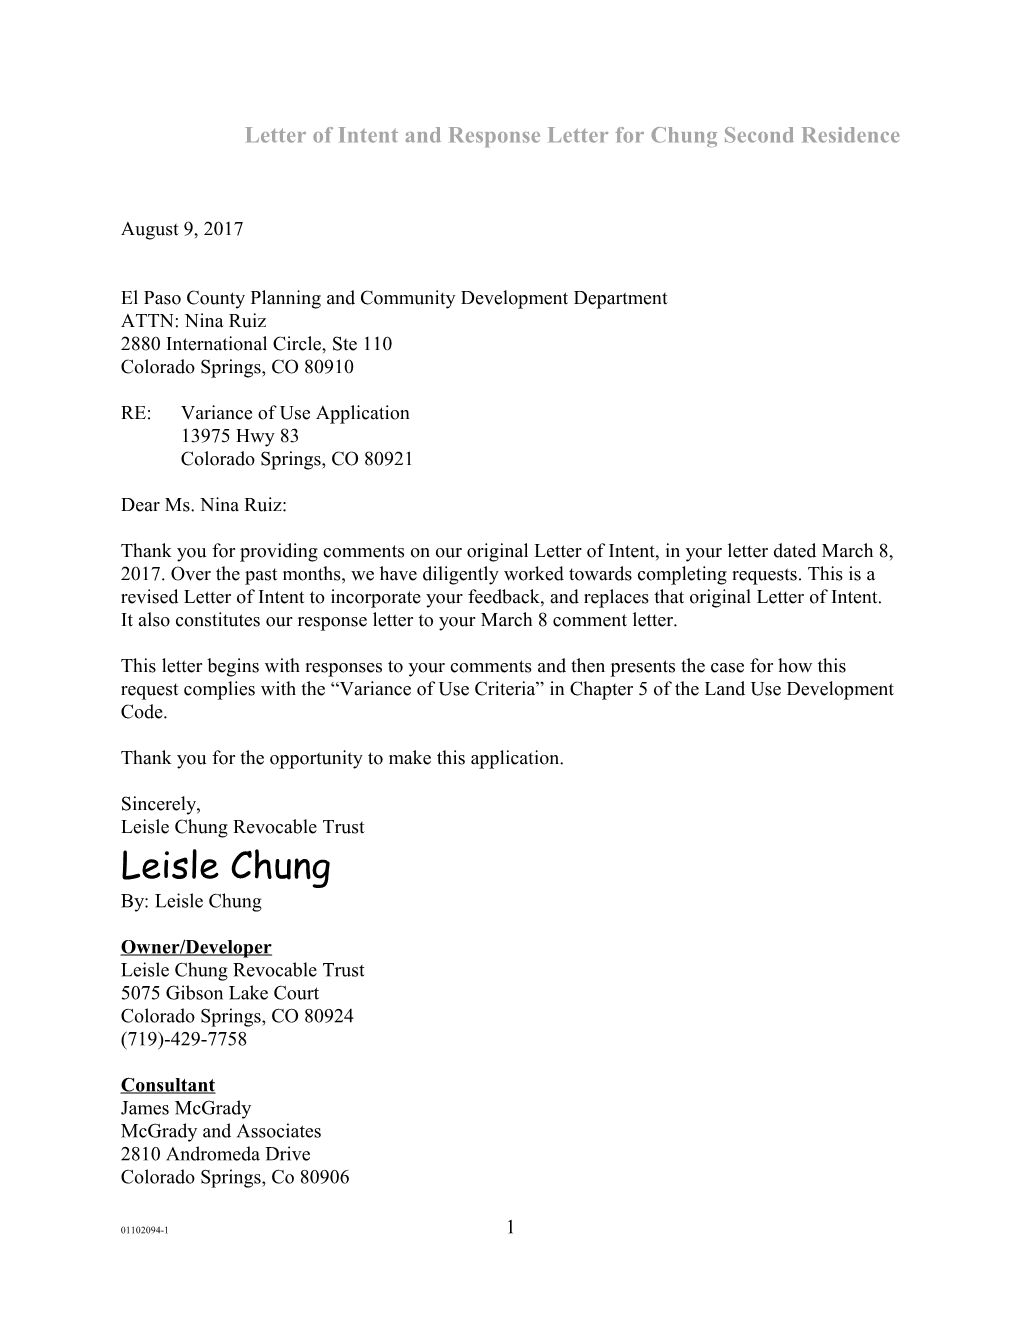 Letter of Intent CLEAN (01102094;1)